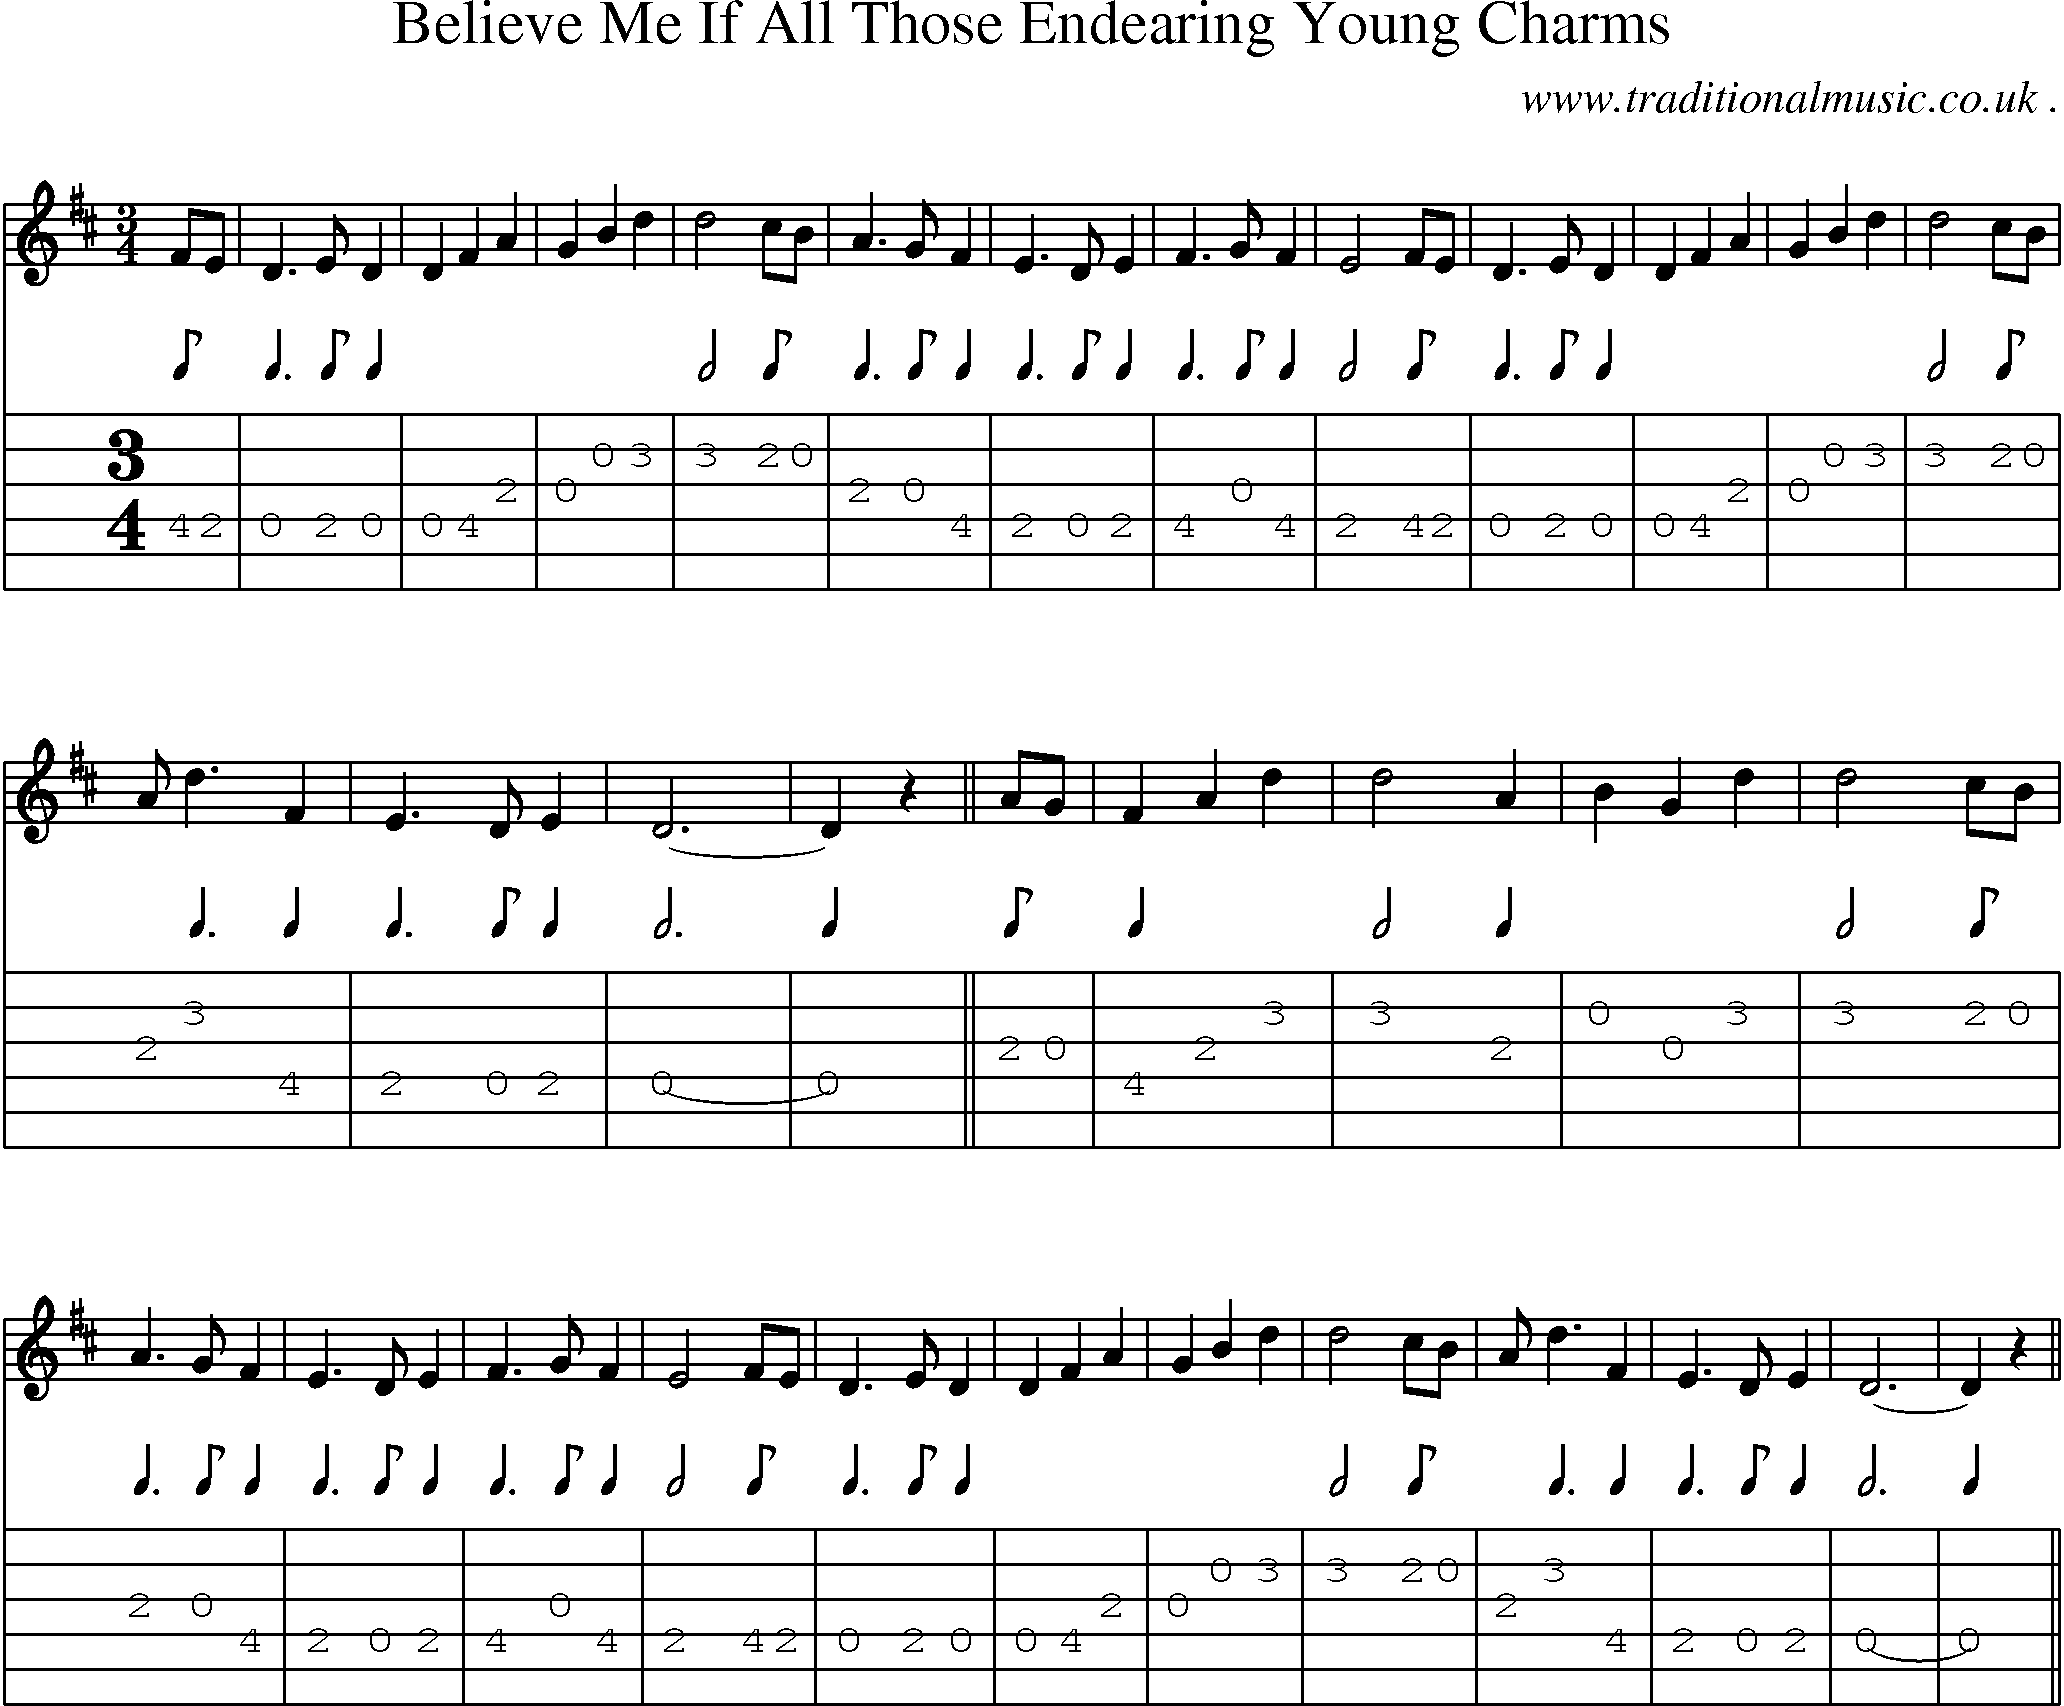 Sheet-Music and Guitar Tabs for Believe Me If All Those Endearing Young Charms